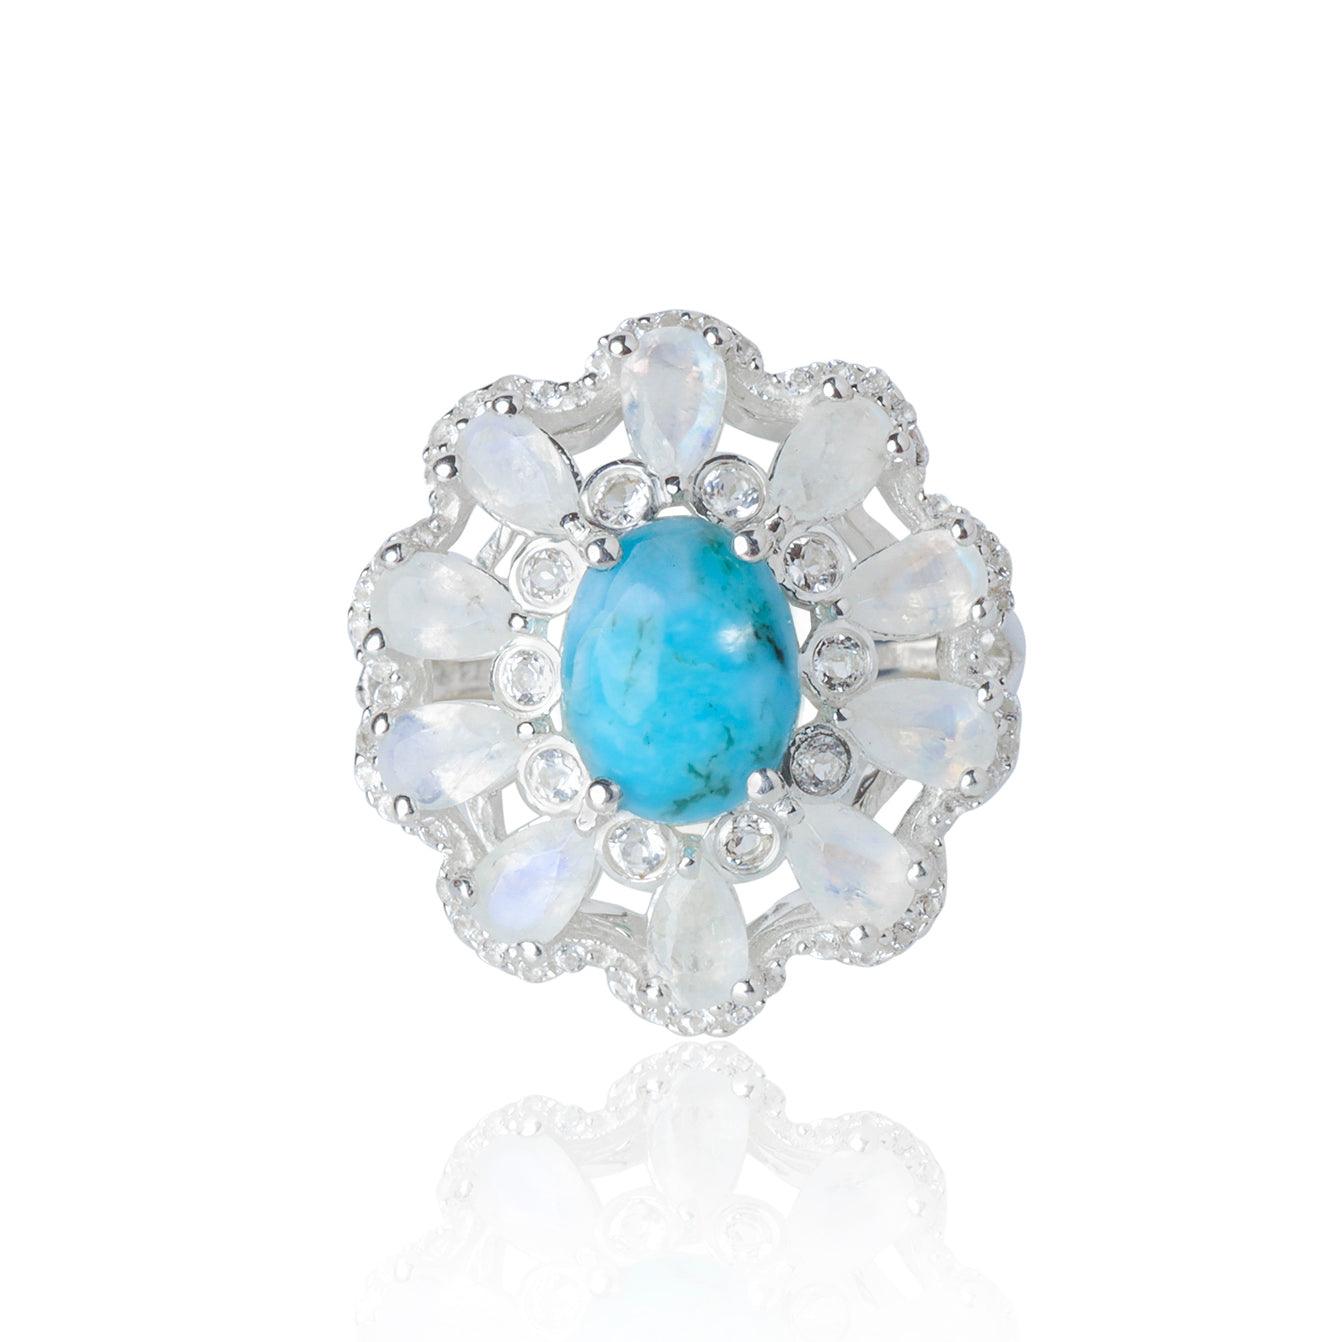 Turquoise Rainbow Moonstone Ring in 925 Sterling Silver - YoTreasure